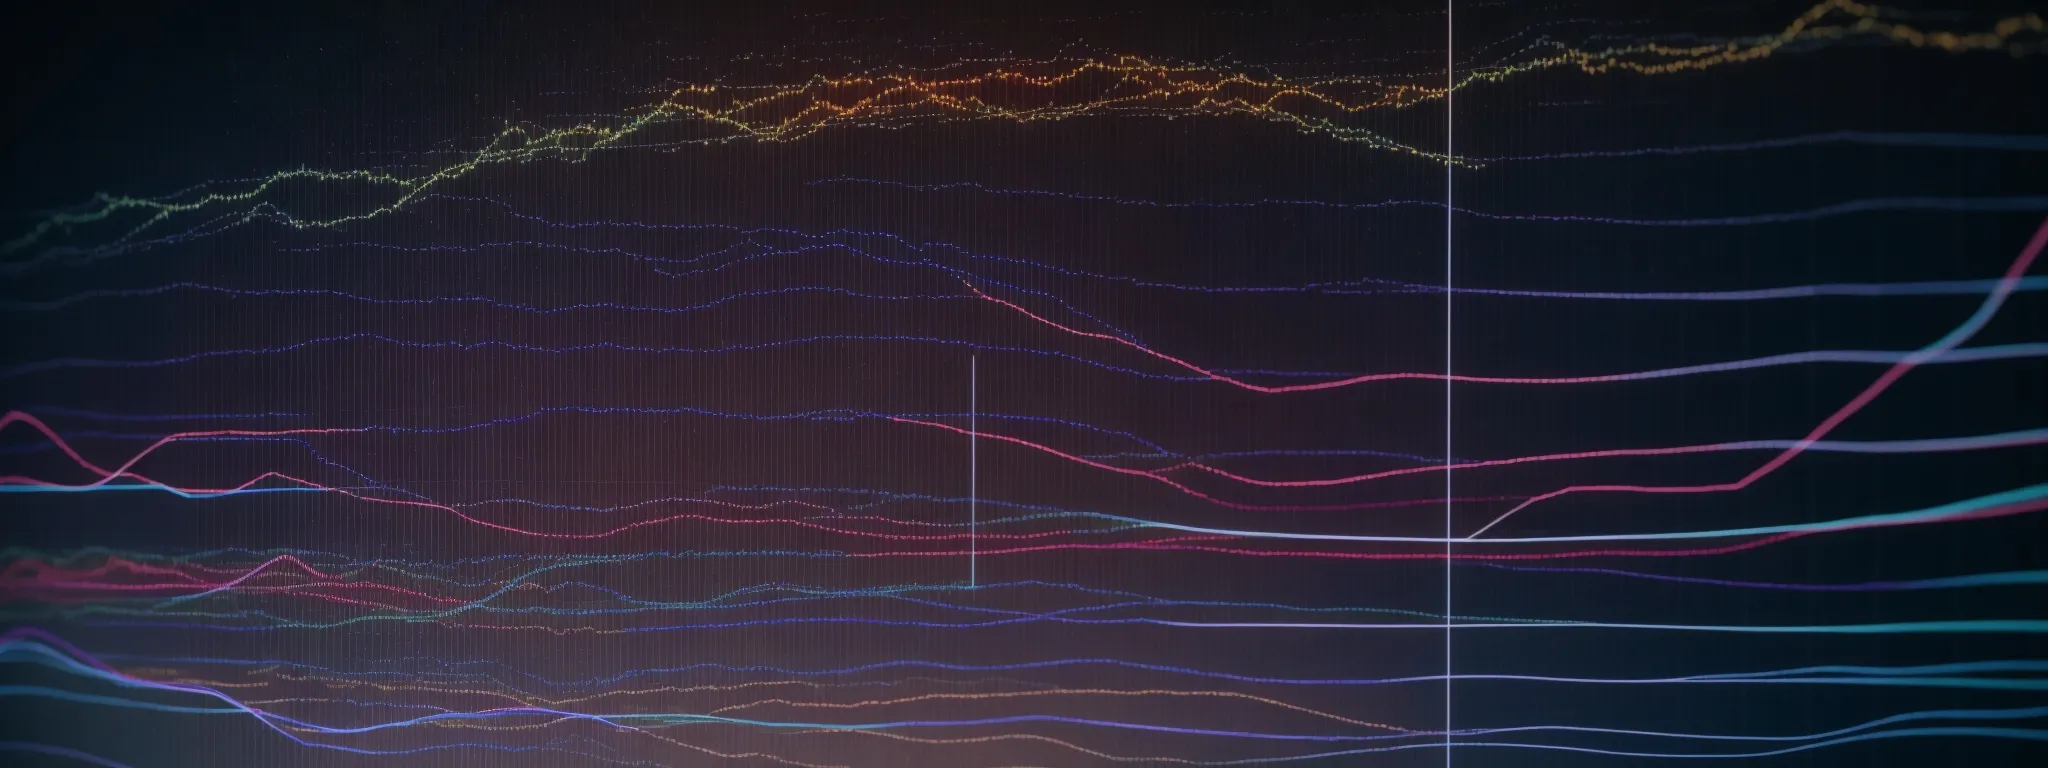 a graph with curving lines representing data trends across the four seasons displayed on a computer screen.